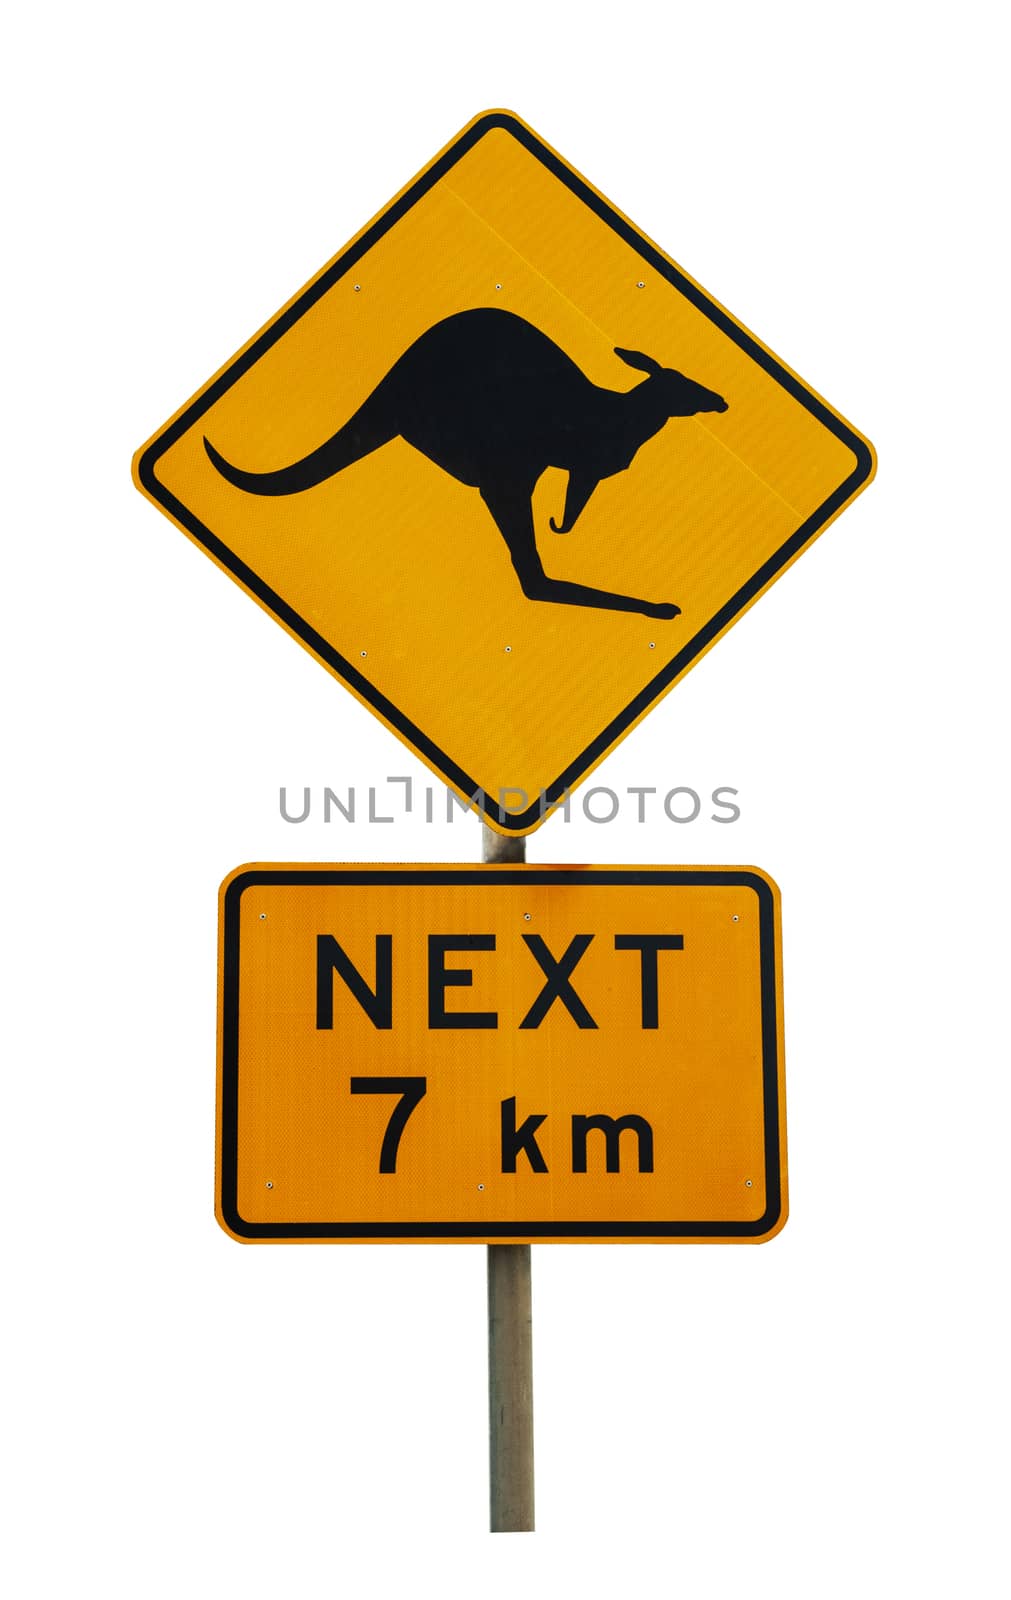 Kangaroo caution sign isolated on white by fyletto